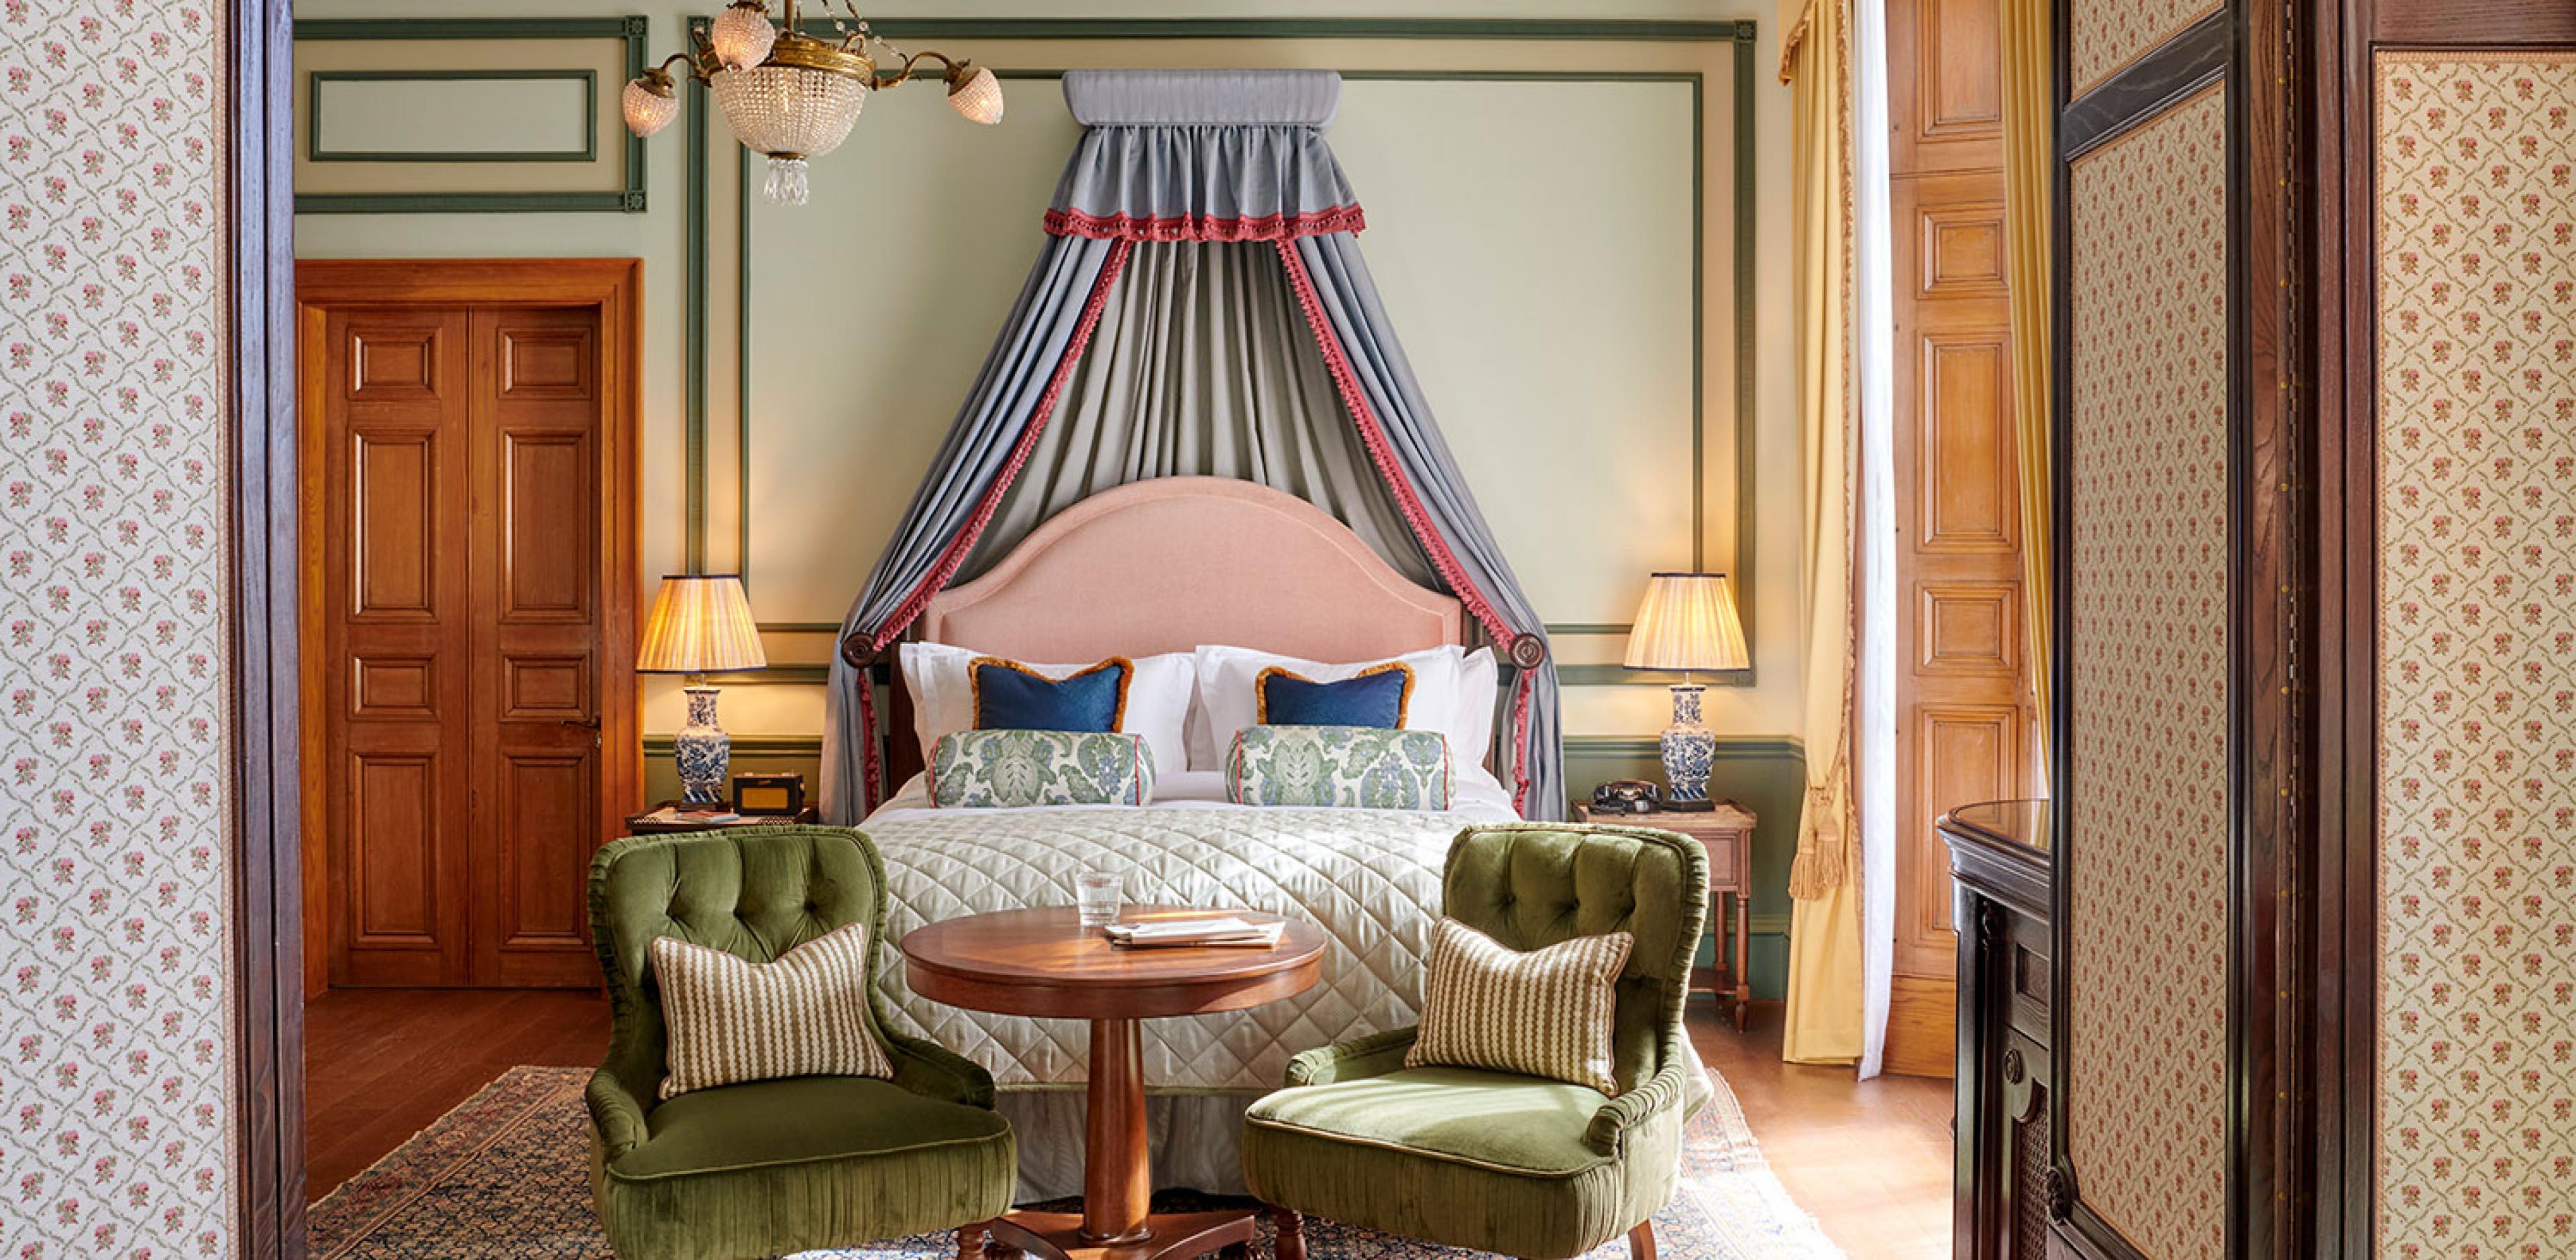 bedroom at luxury boutique hotel in scotland, with canopy bed and seating